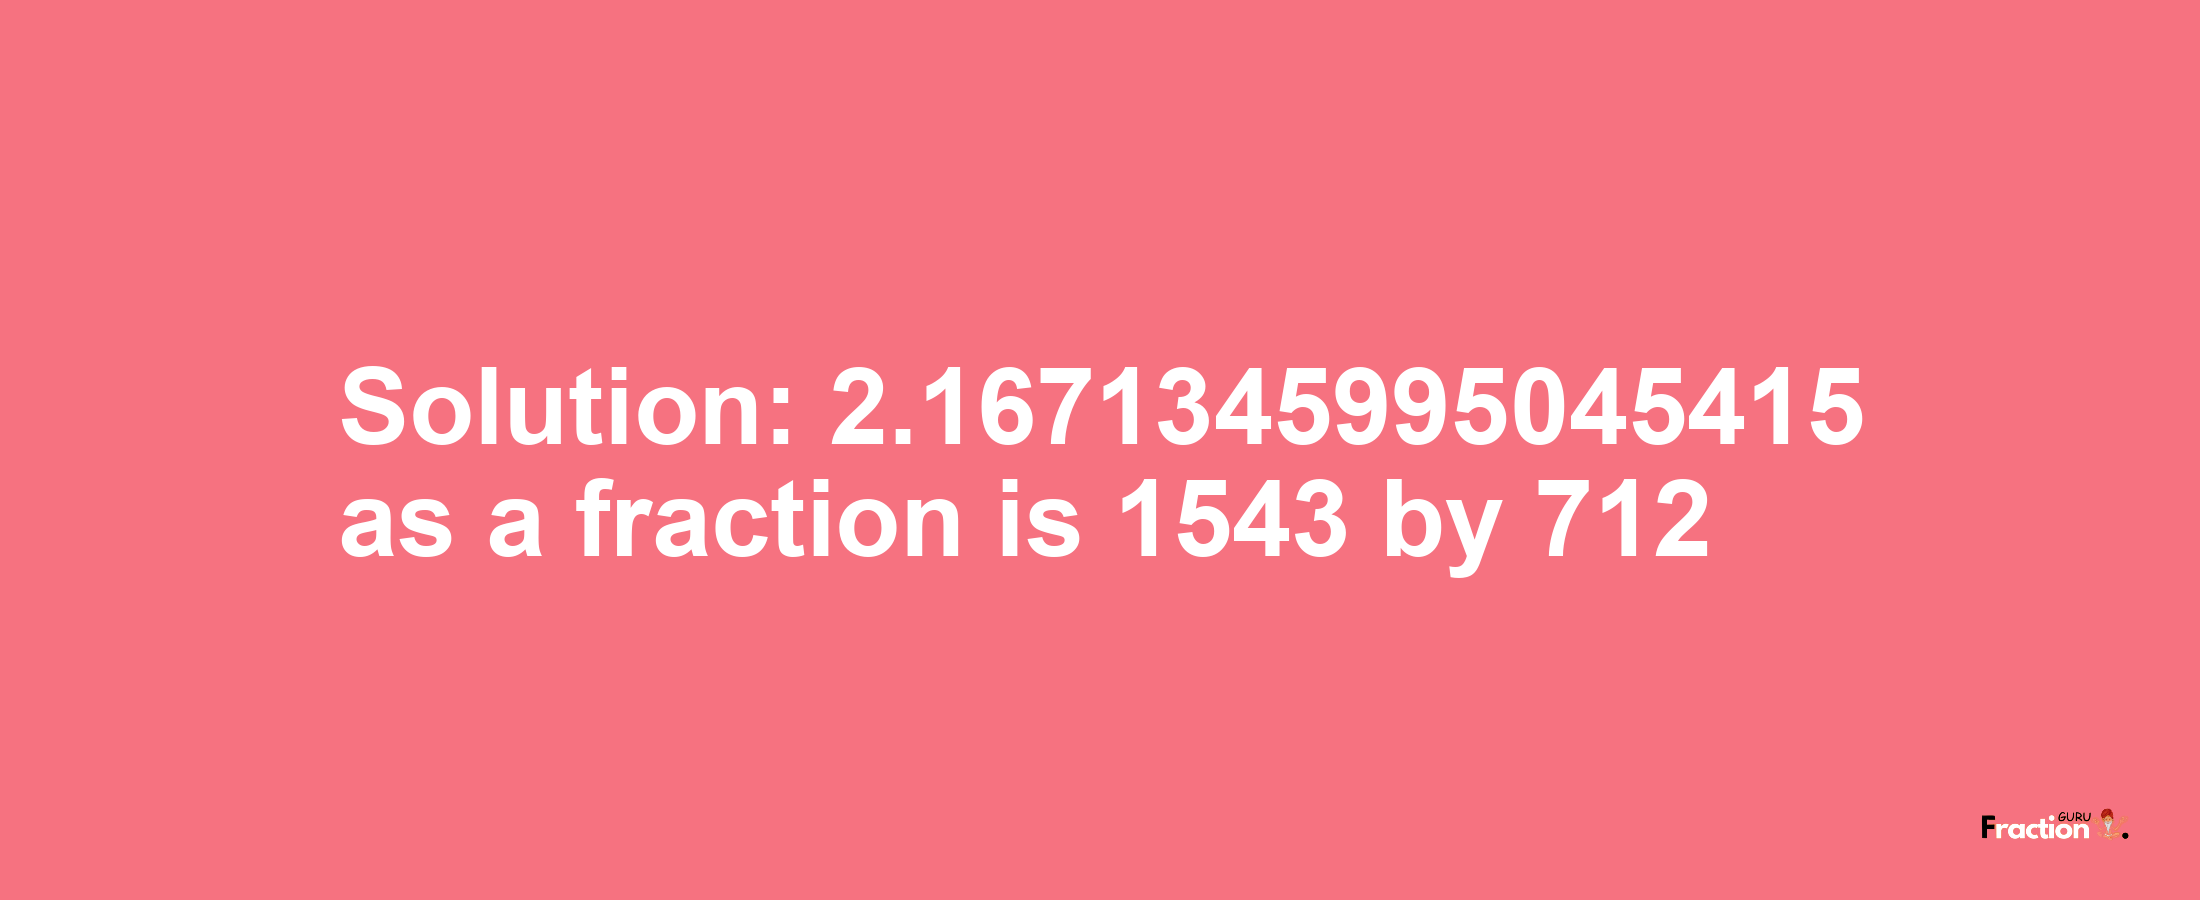 Solution:2.1671345995045415 as a fraction is 1543/712